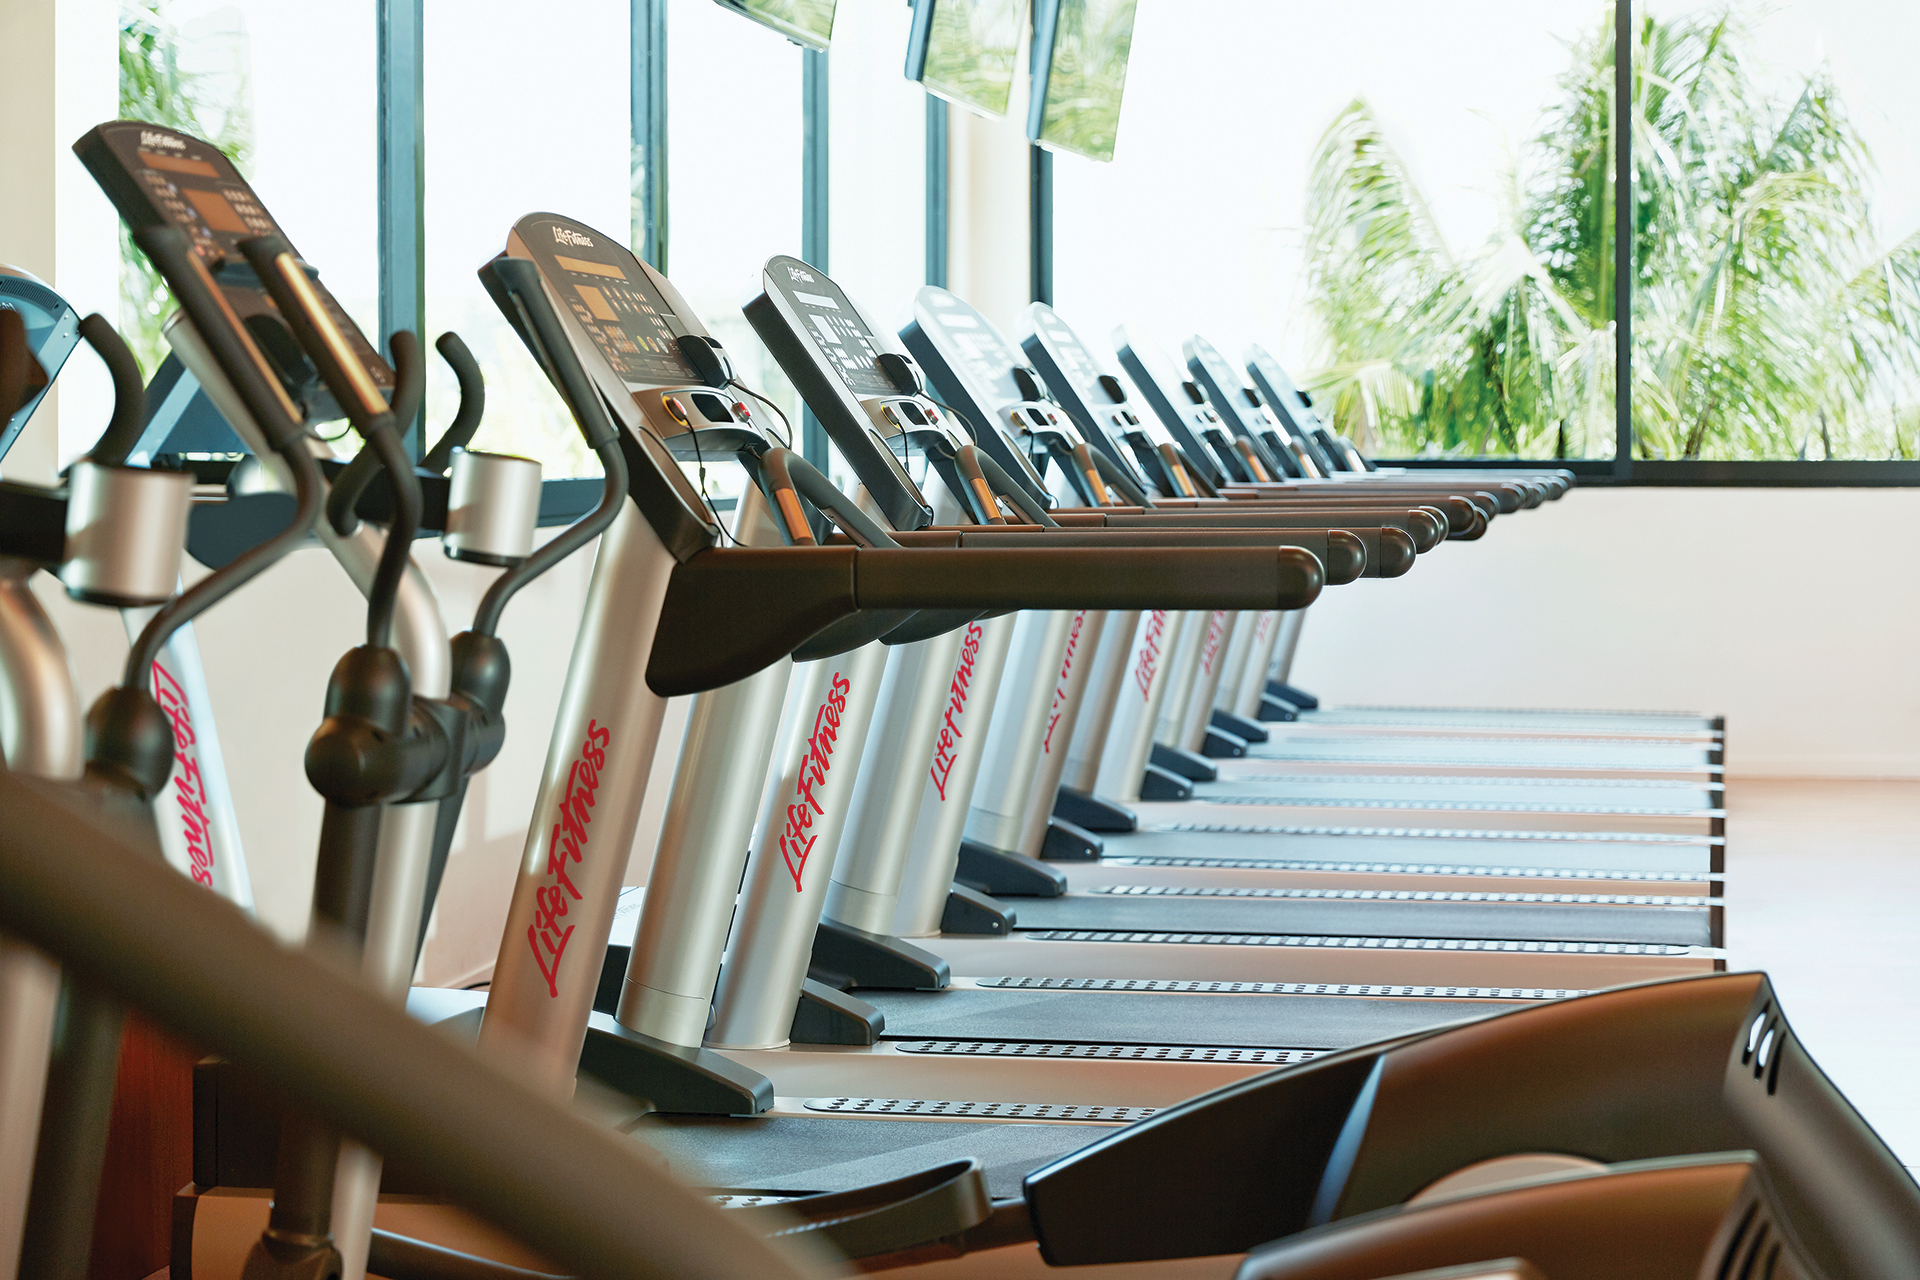 Using gym equipment in Excellence Resorts with green energy